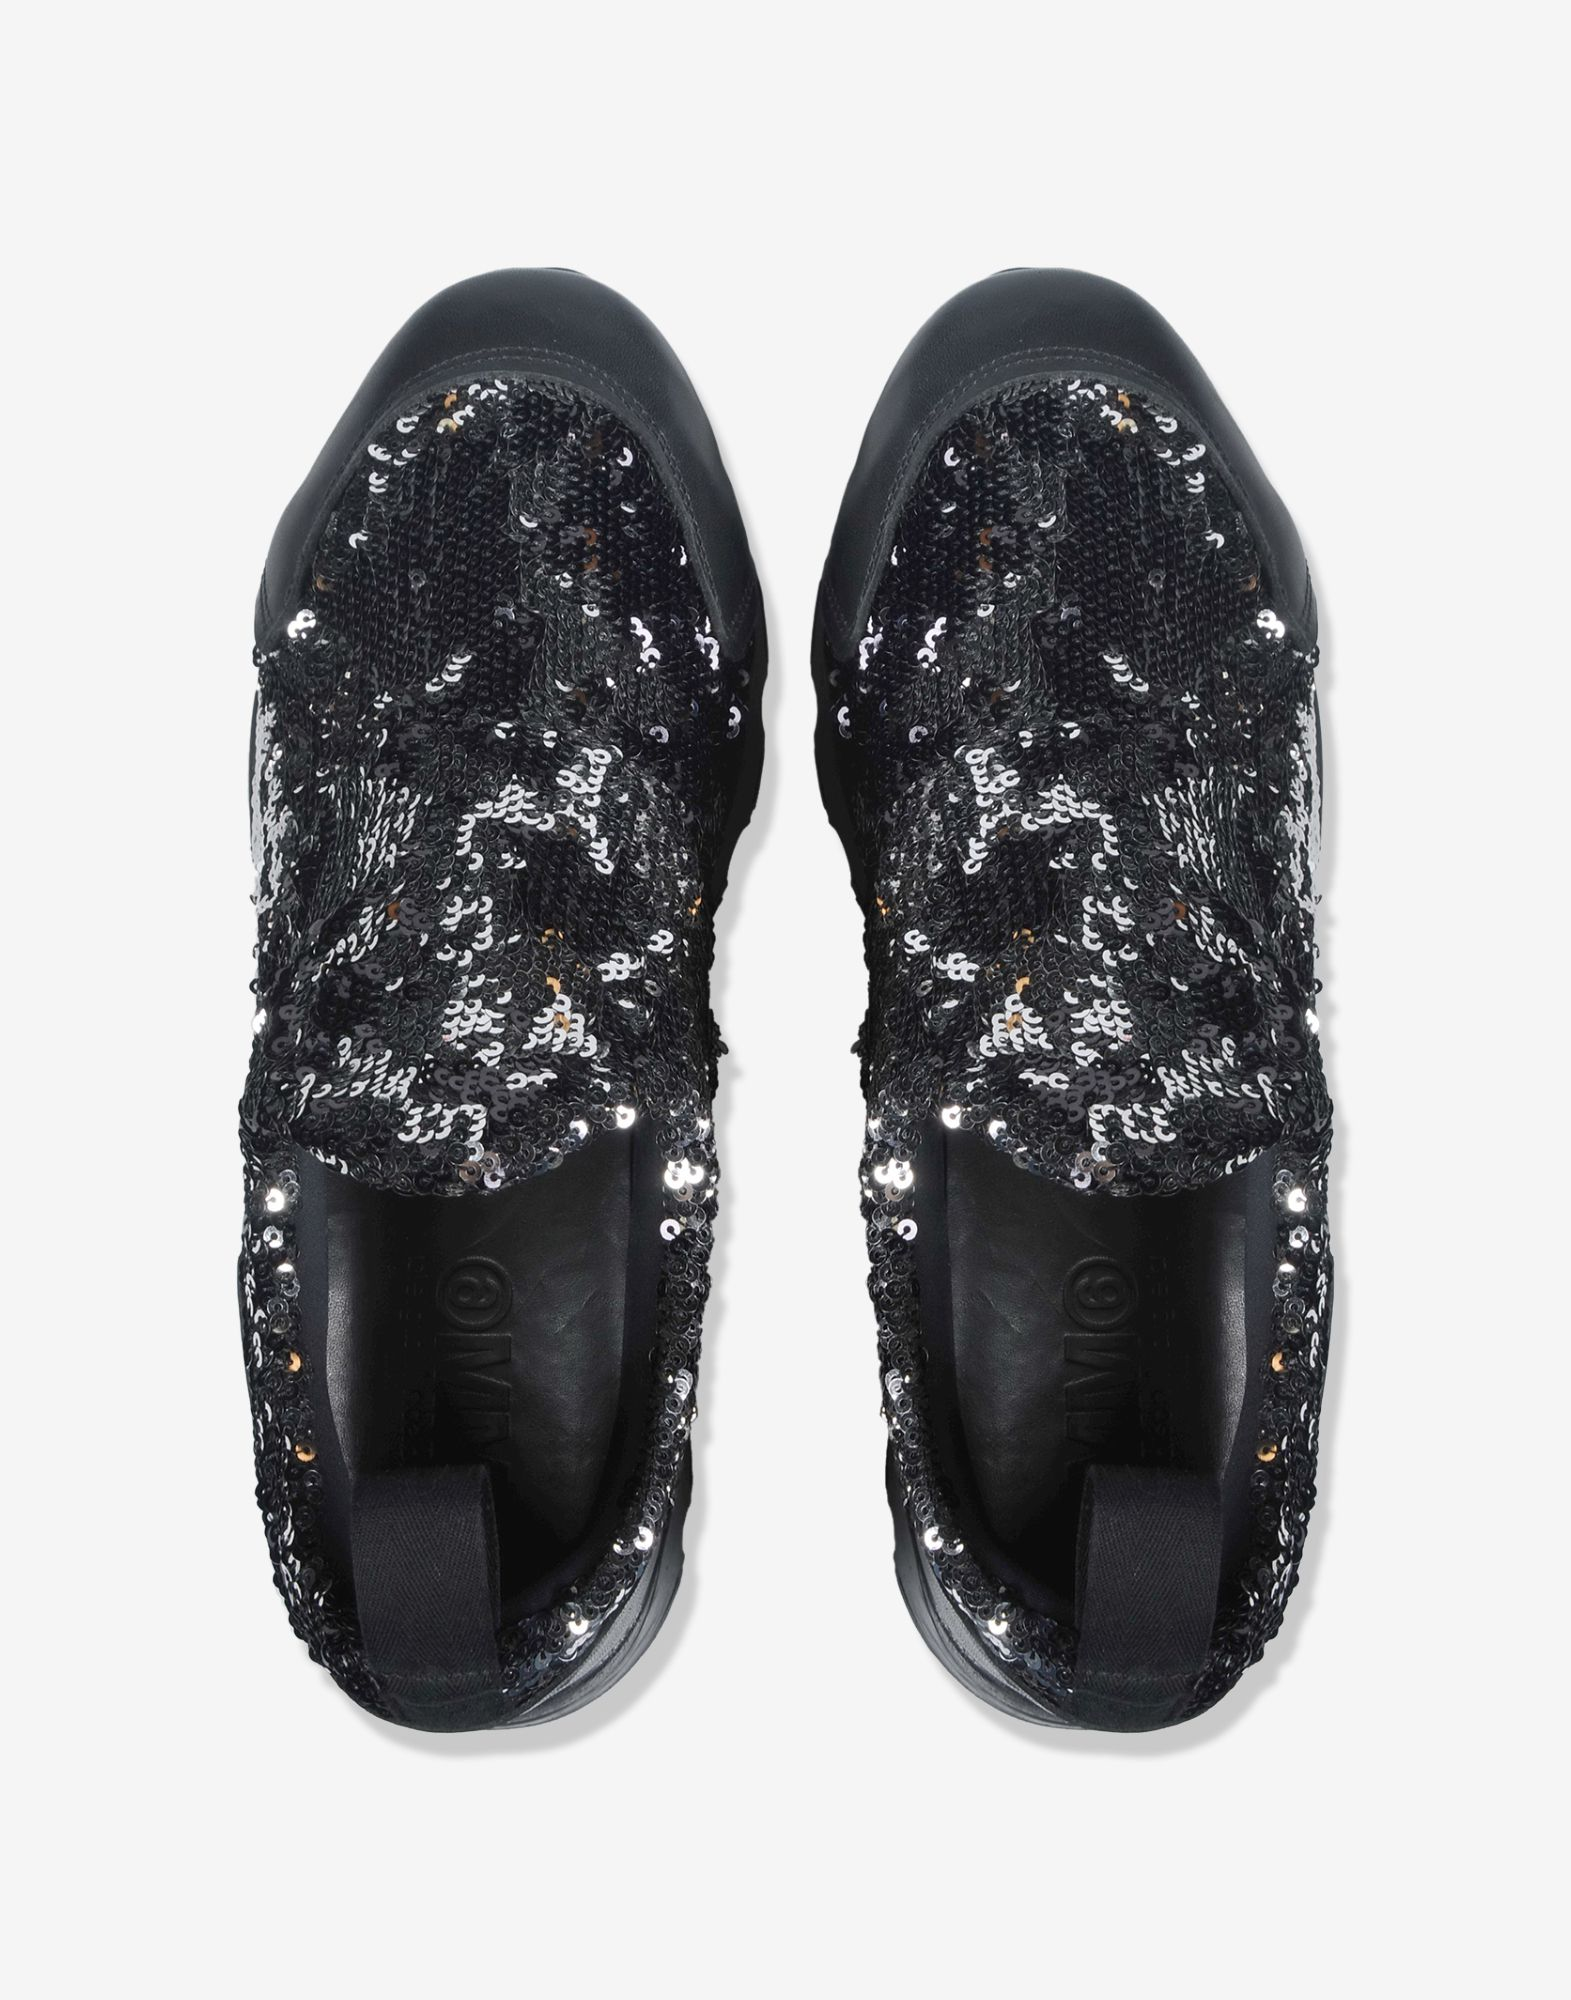 Lyst - Mm6 By Maison Martin Margiela Laceless Sequin Sneakers in Black